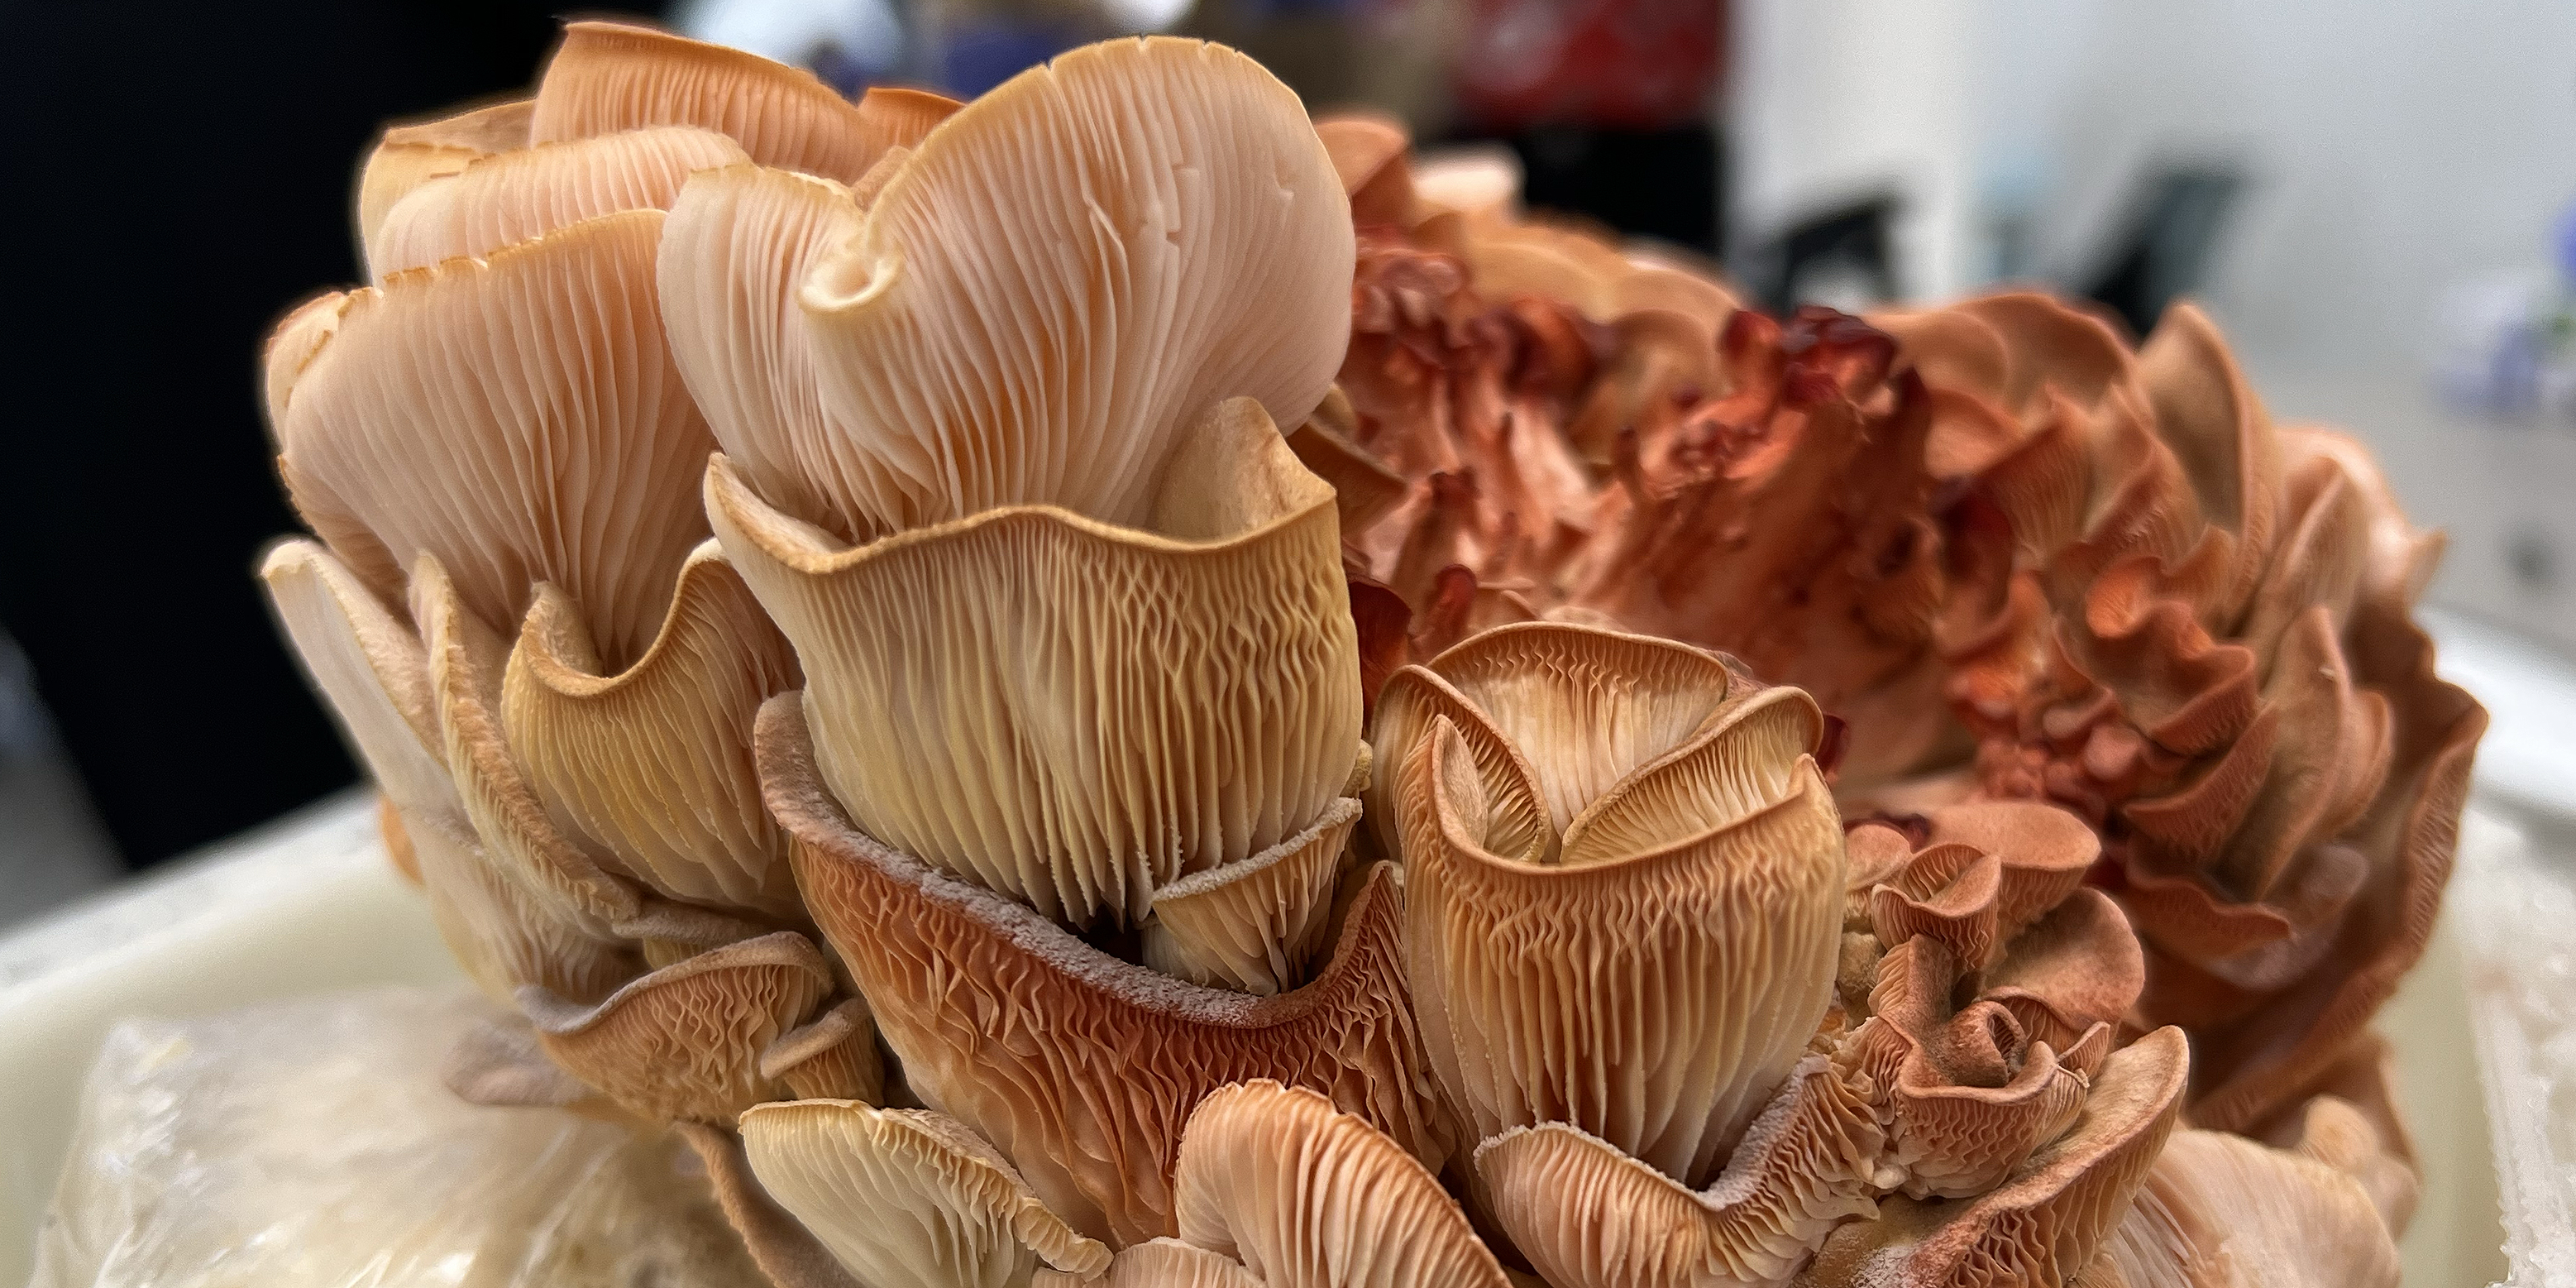 a glorious pink oyster mushroom cultivated by grad student Yitao Yuan